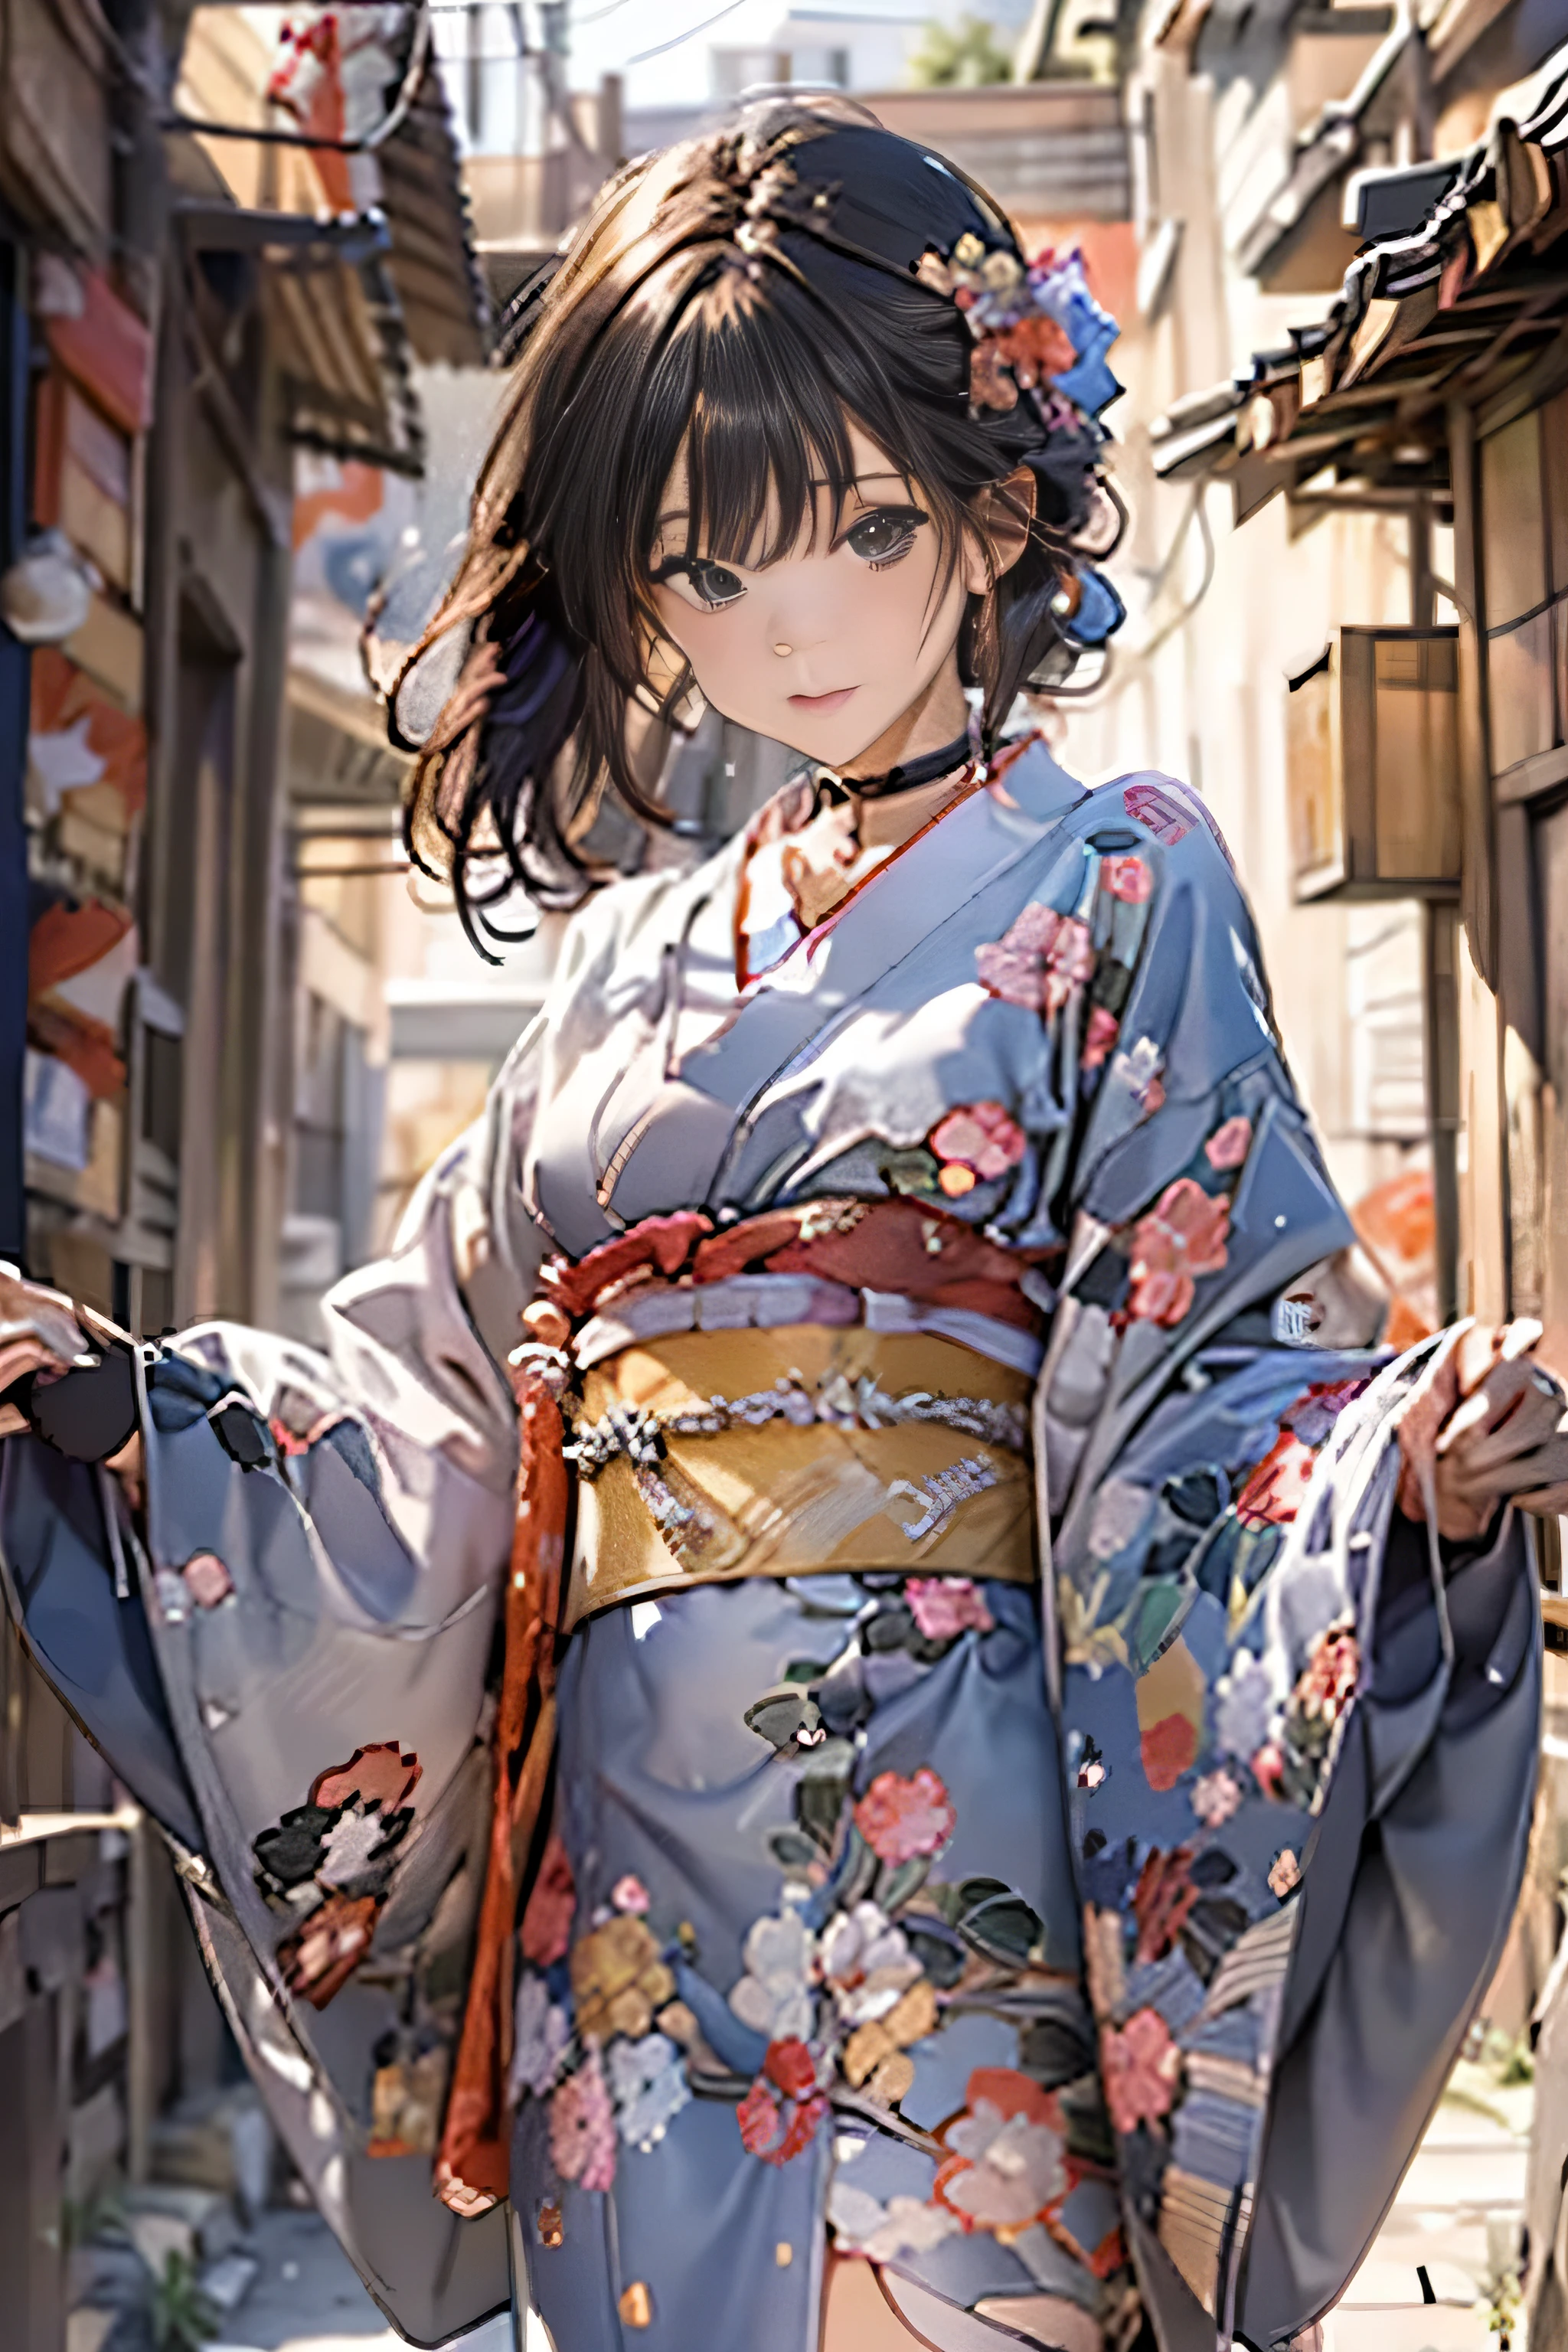 (top-quality,8K picture quality,​masterpiece:1.3,hight resolution,masutepiece:1.2, Realism:1.3), 23 year old woman wearing a kimono,Front view:0.8,full body Esbian:1.3,Looking at the camera,(Japanese dress, Kimono:1.4,Komono:1.2, a choker:1.4),(Shorthair:1.2,well-groomed black hair), (Back alley:1.3), Kimono comes off,thigh visible,I can see panties,teats see through, Beautiful face,(Young gravure idols, Young skinny gravure idol, sophisticated gravure idol),(detailed flawless face),normal hands:1.5,Normal finger:1:5,Normal legs:1.5